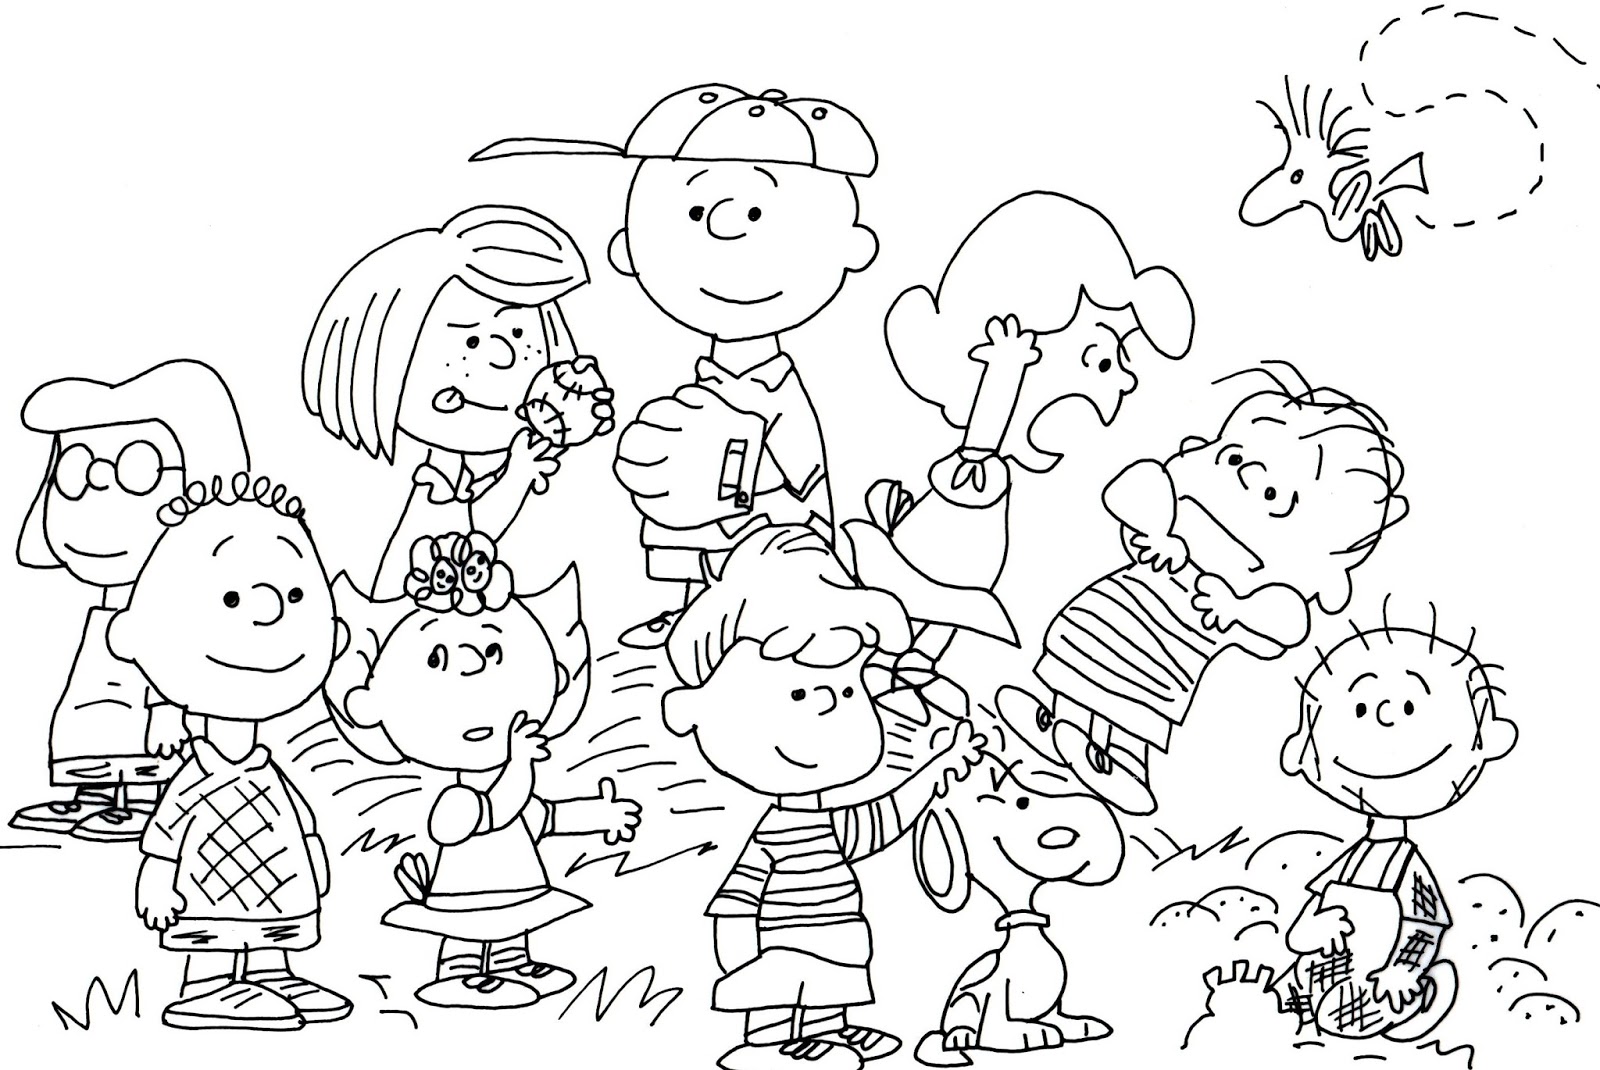 gambar-free-charlie-brown-snoopy-peanuts-coloring-pages-printable-page